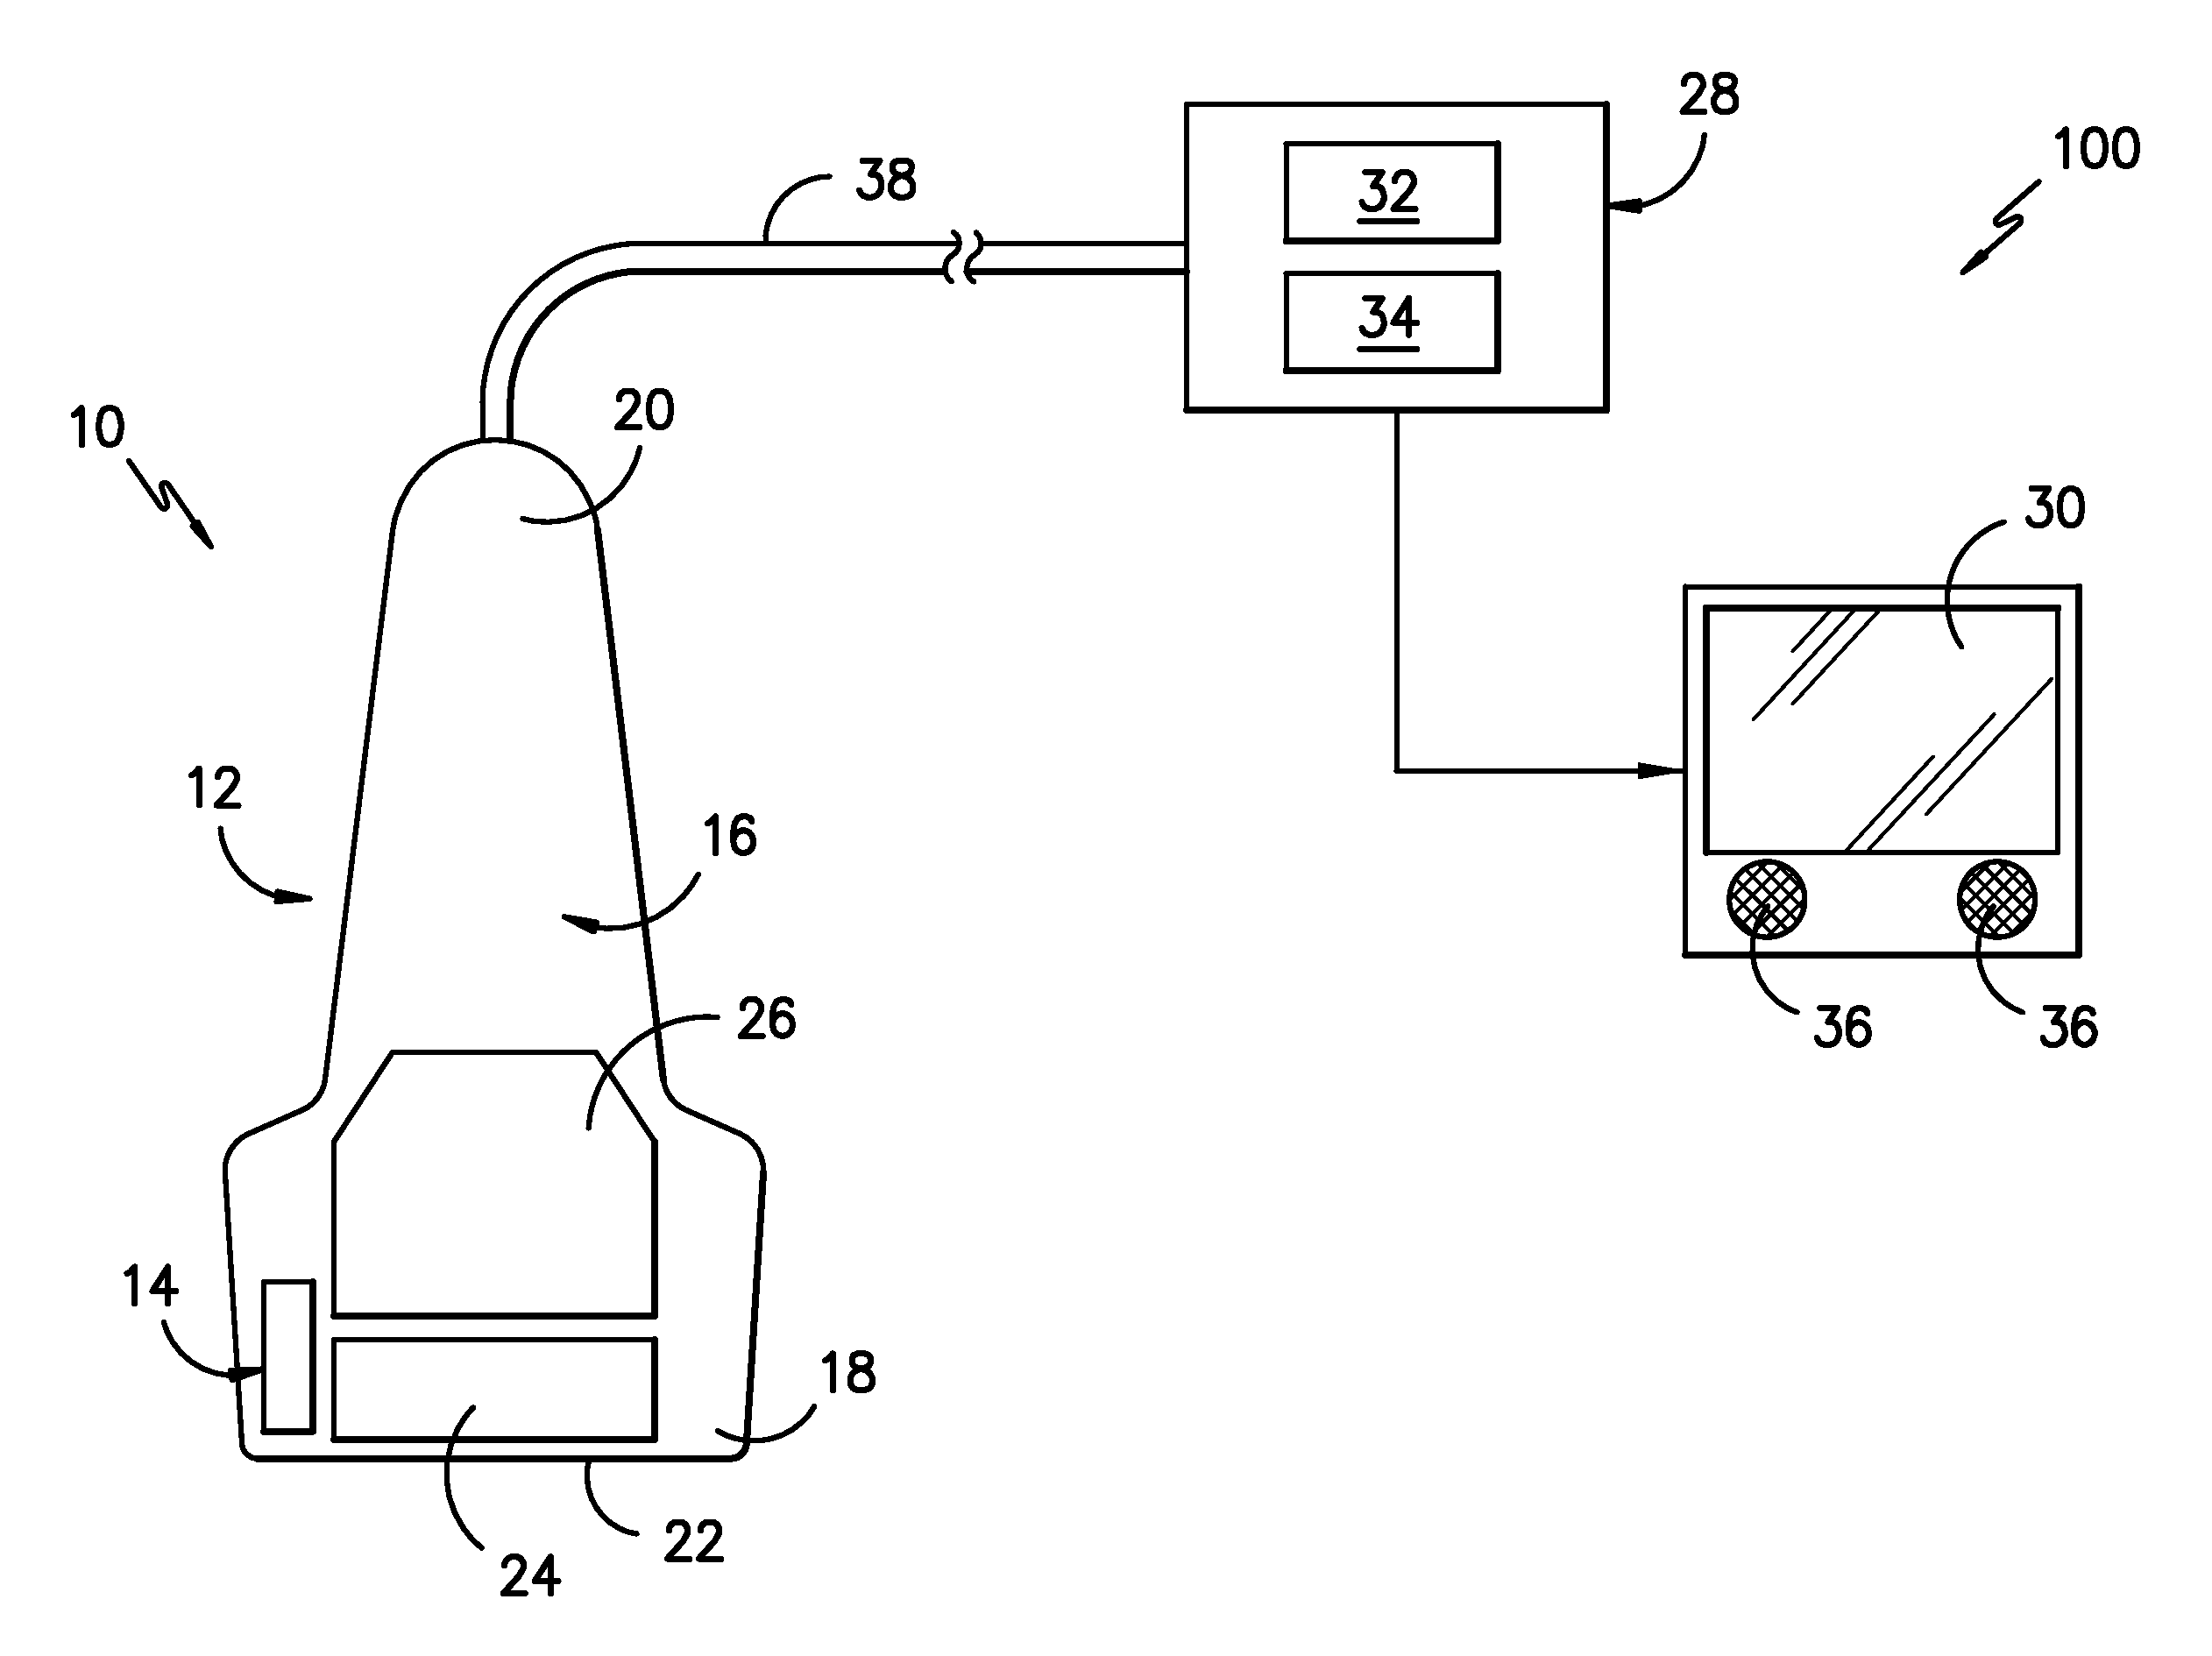 Enhanced ultrasound device and methods of using same